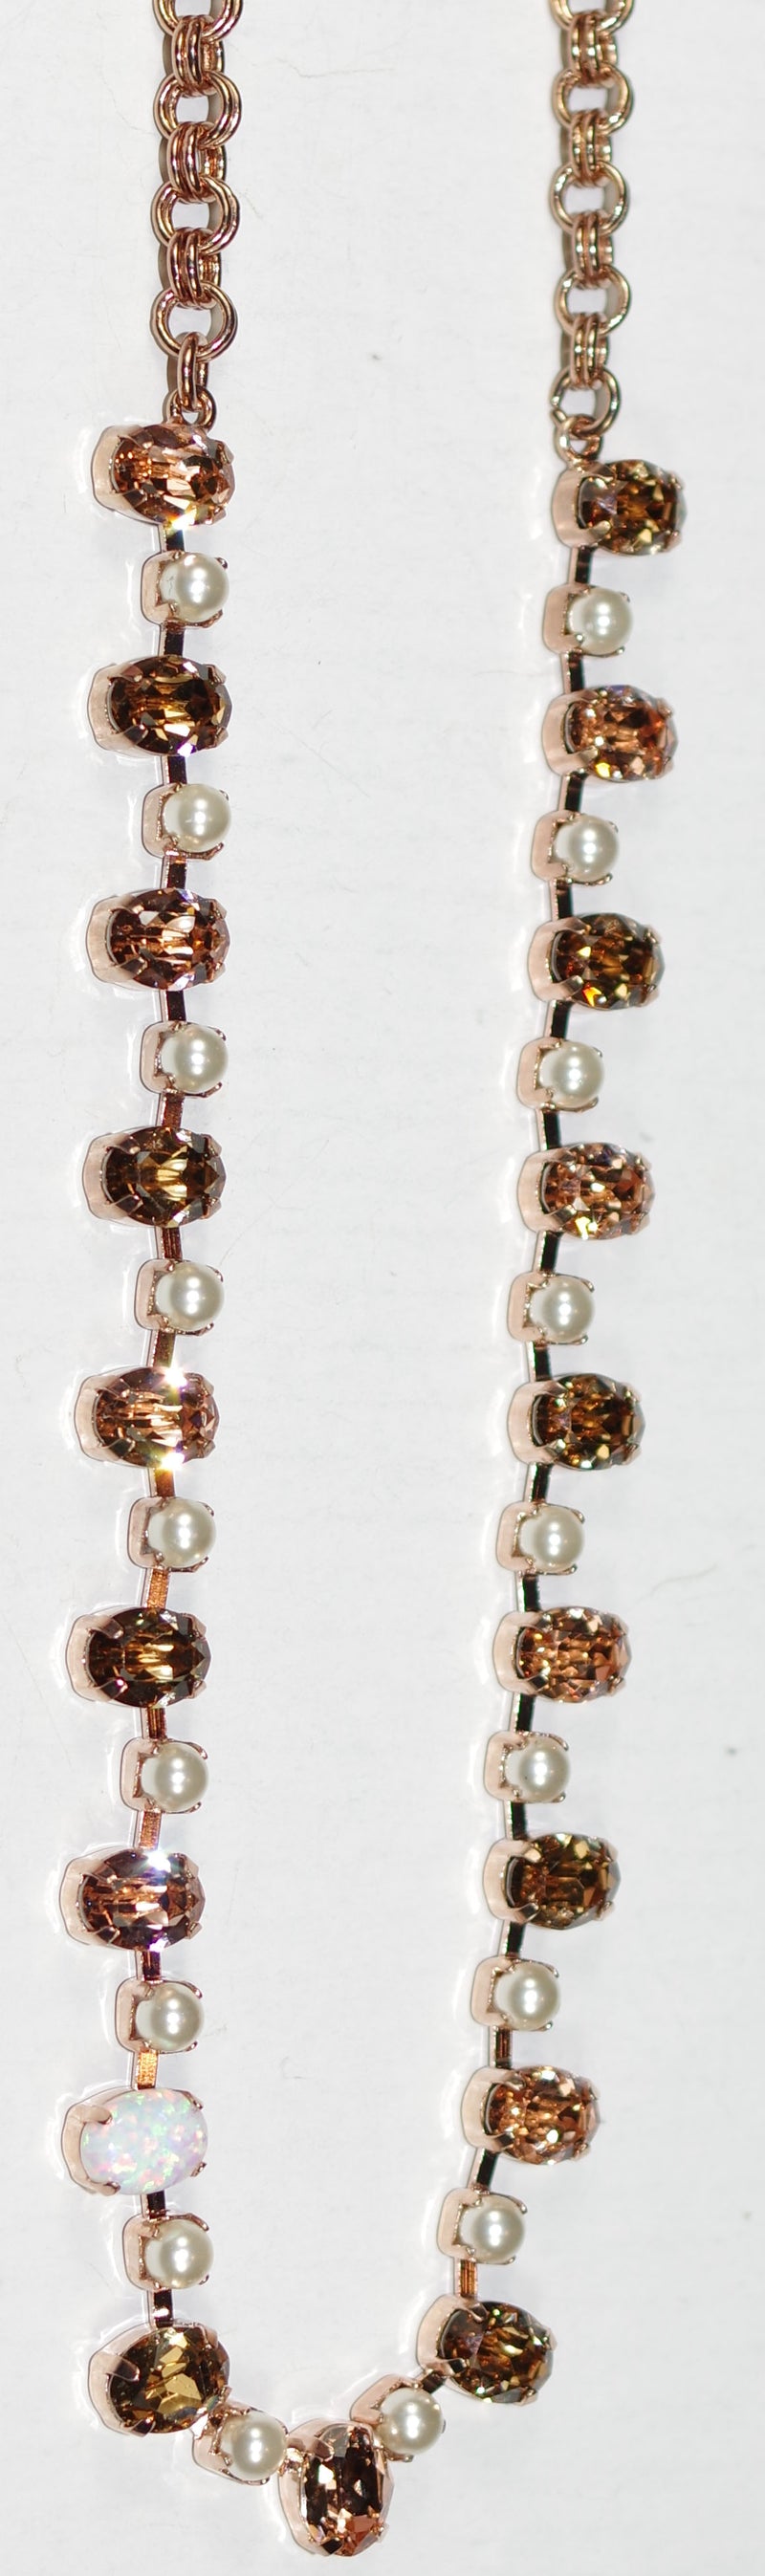 MARIANA NECKLACE COOKIE DOUGH: amber, pearl stones in rosegold setting, 18" adjustable chain